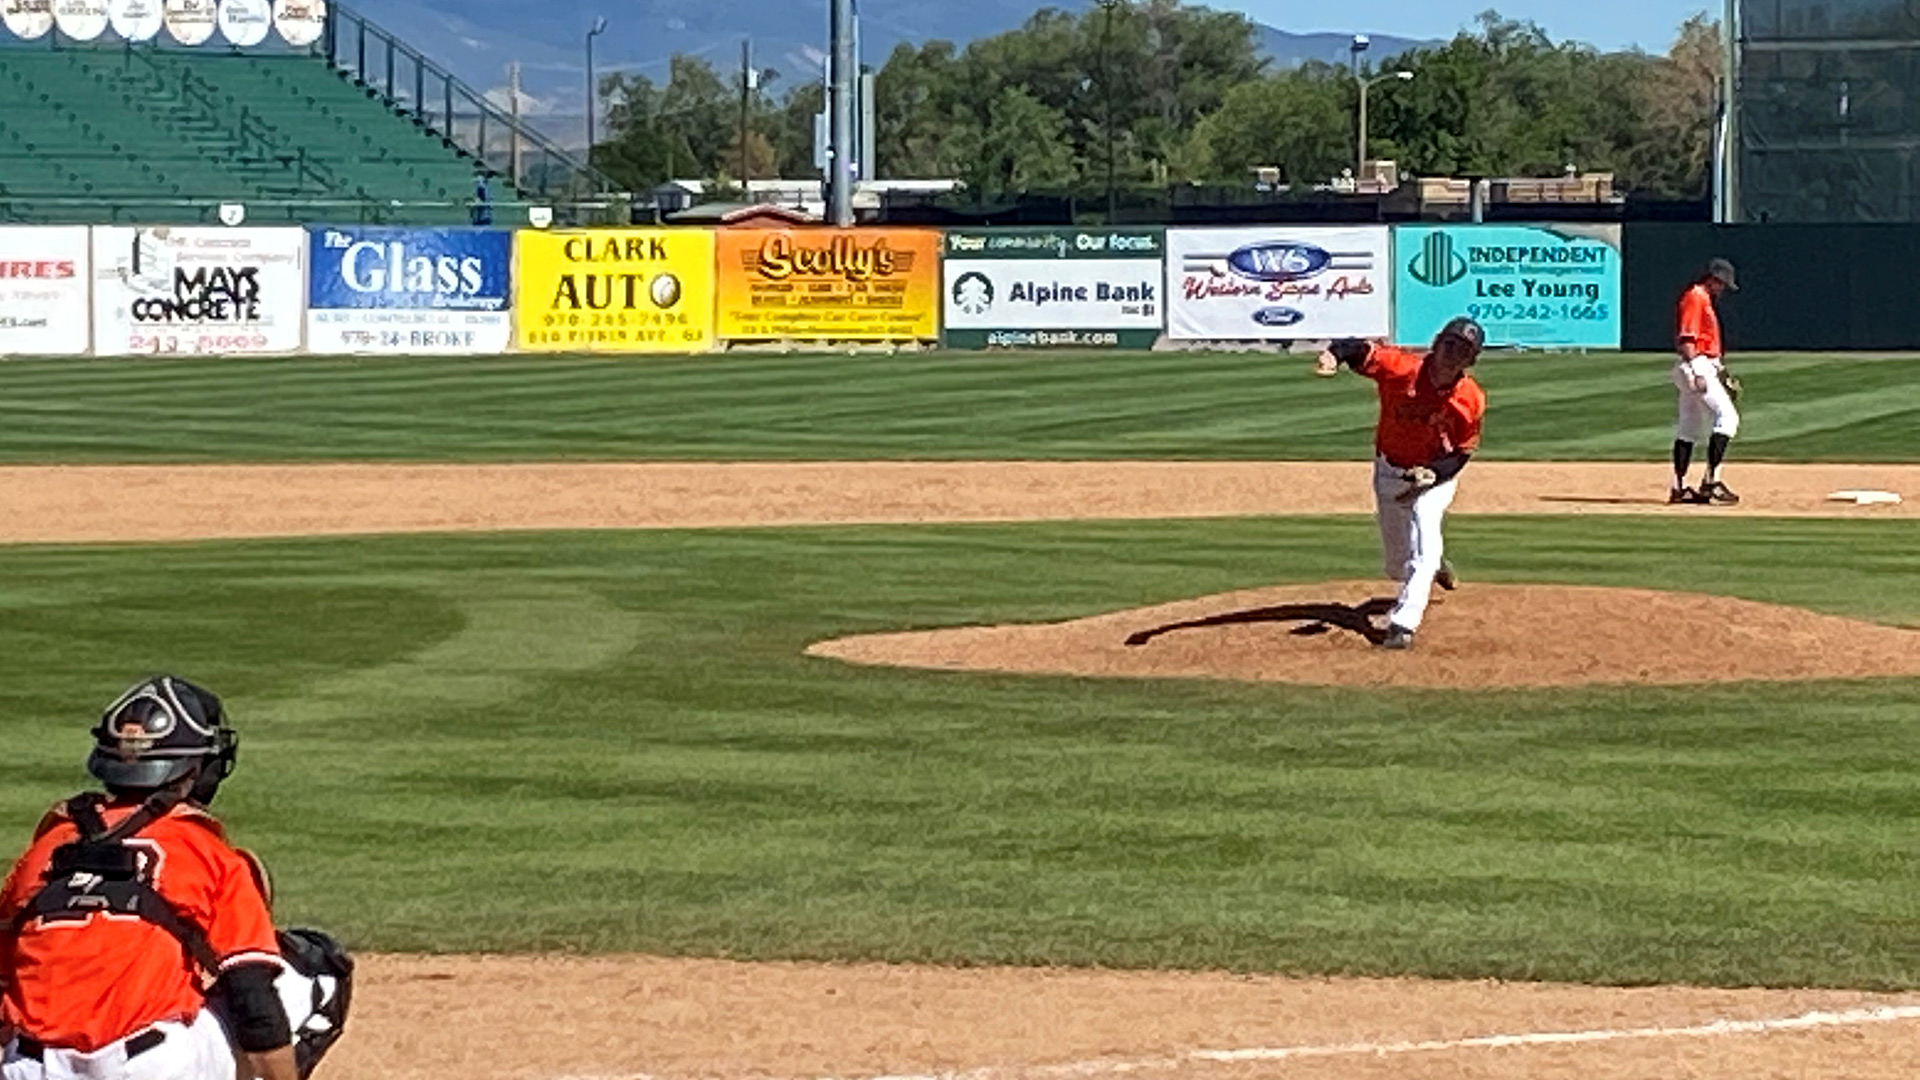 Grant Adler pitching